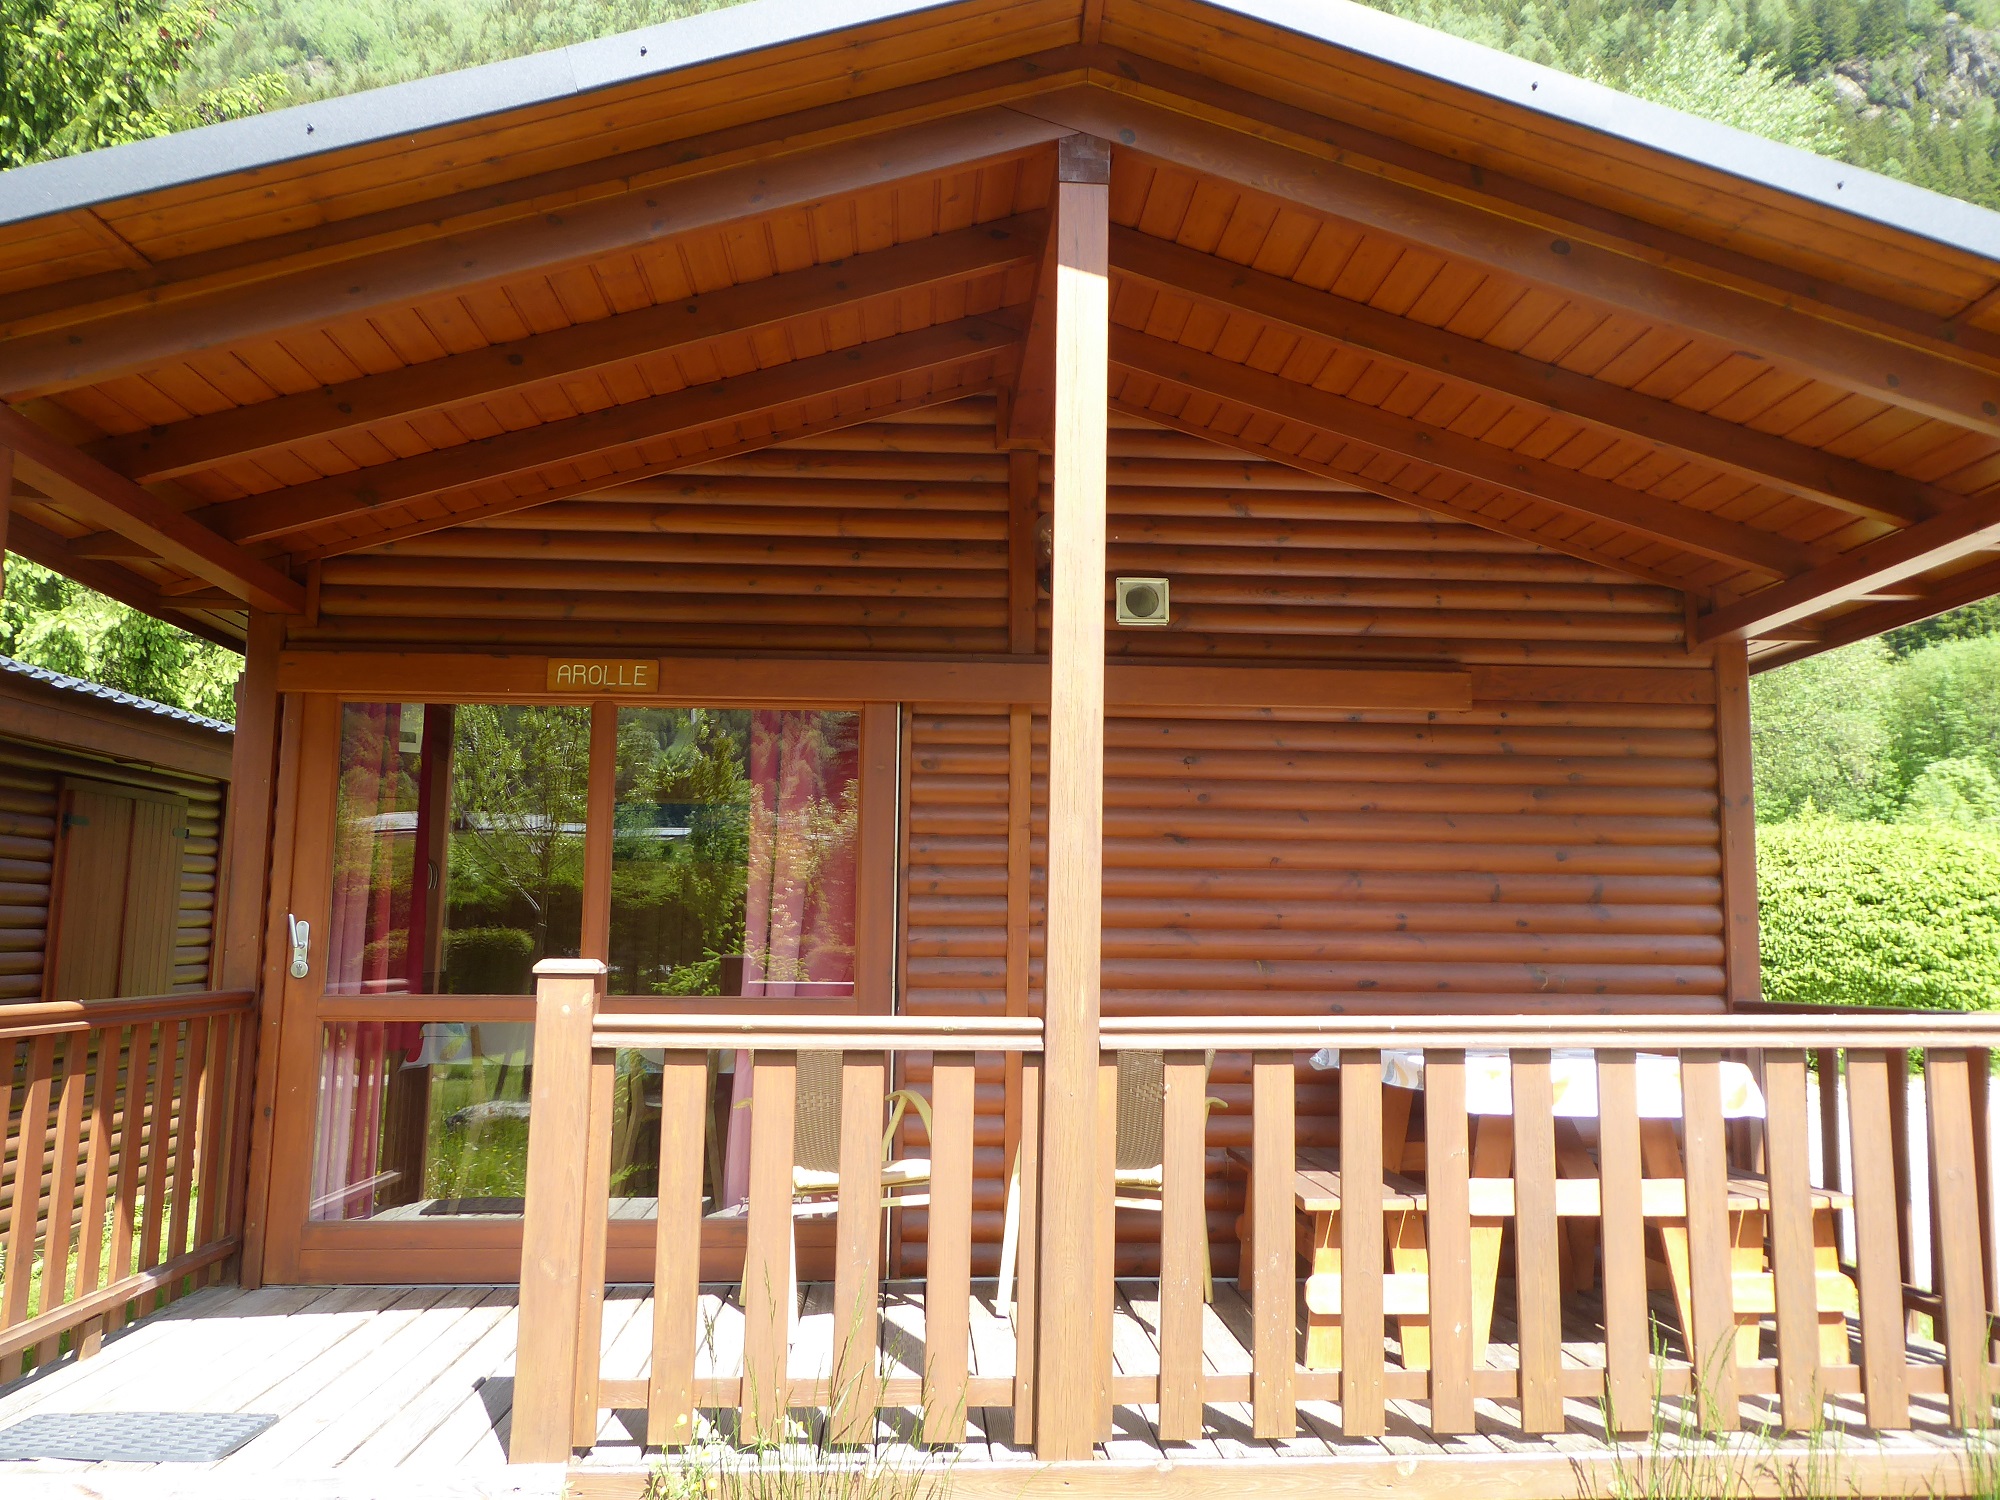 Chalet Arolles 2 bedrooms / Arrival and departure on SATURDAY in July and August